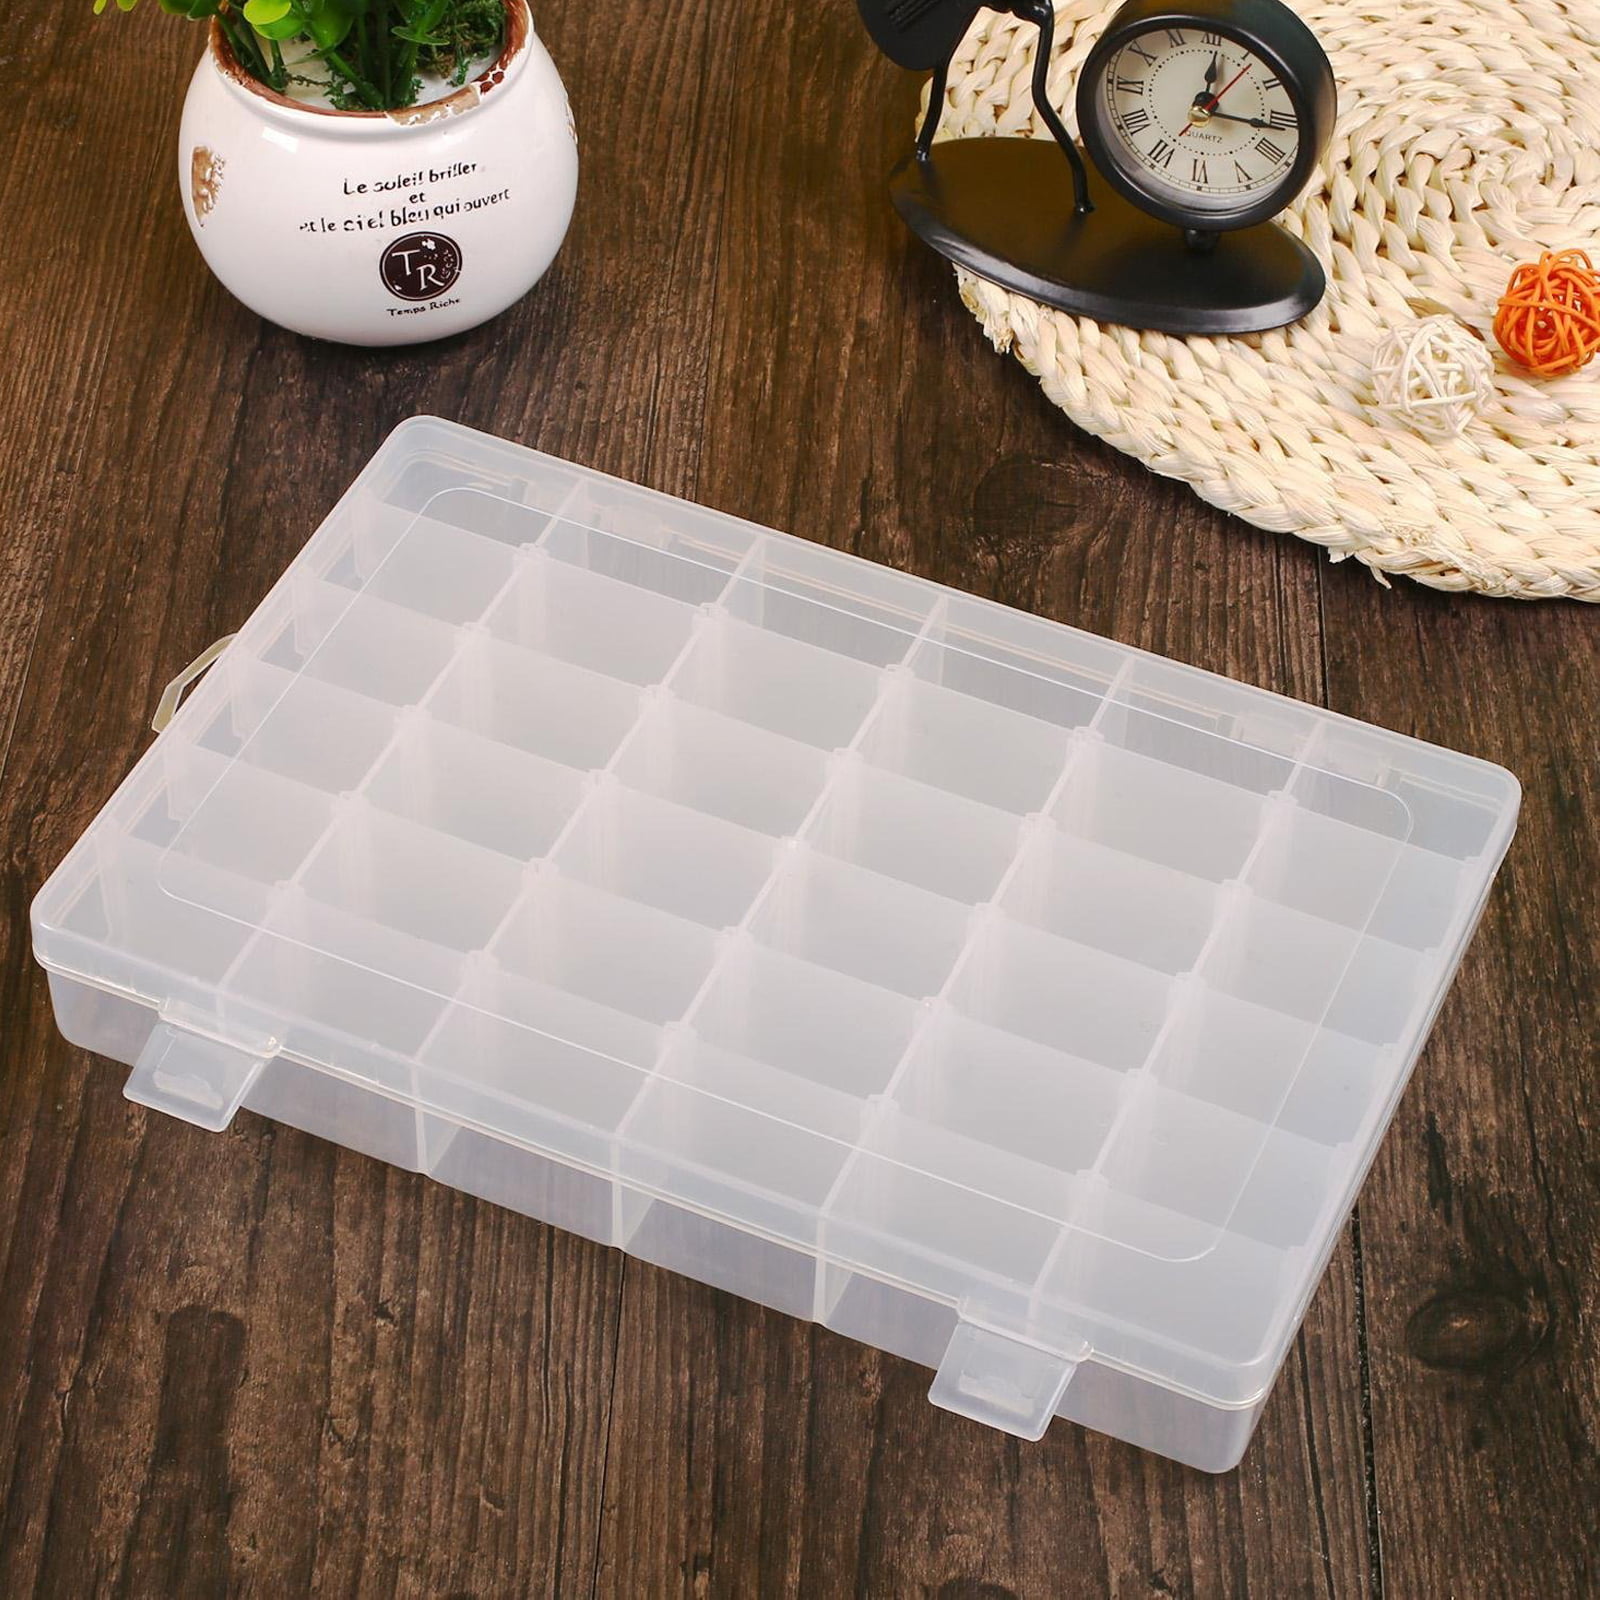 Optimal Organizer Premium 36 Grids Adjustable Compartments, Clear Tackle Box Organizers and Storage Container for Craft, Arts, Bead, Perler, Clay, 4